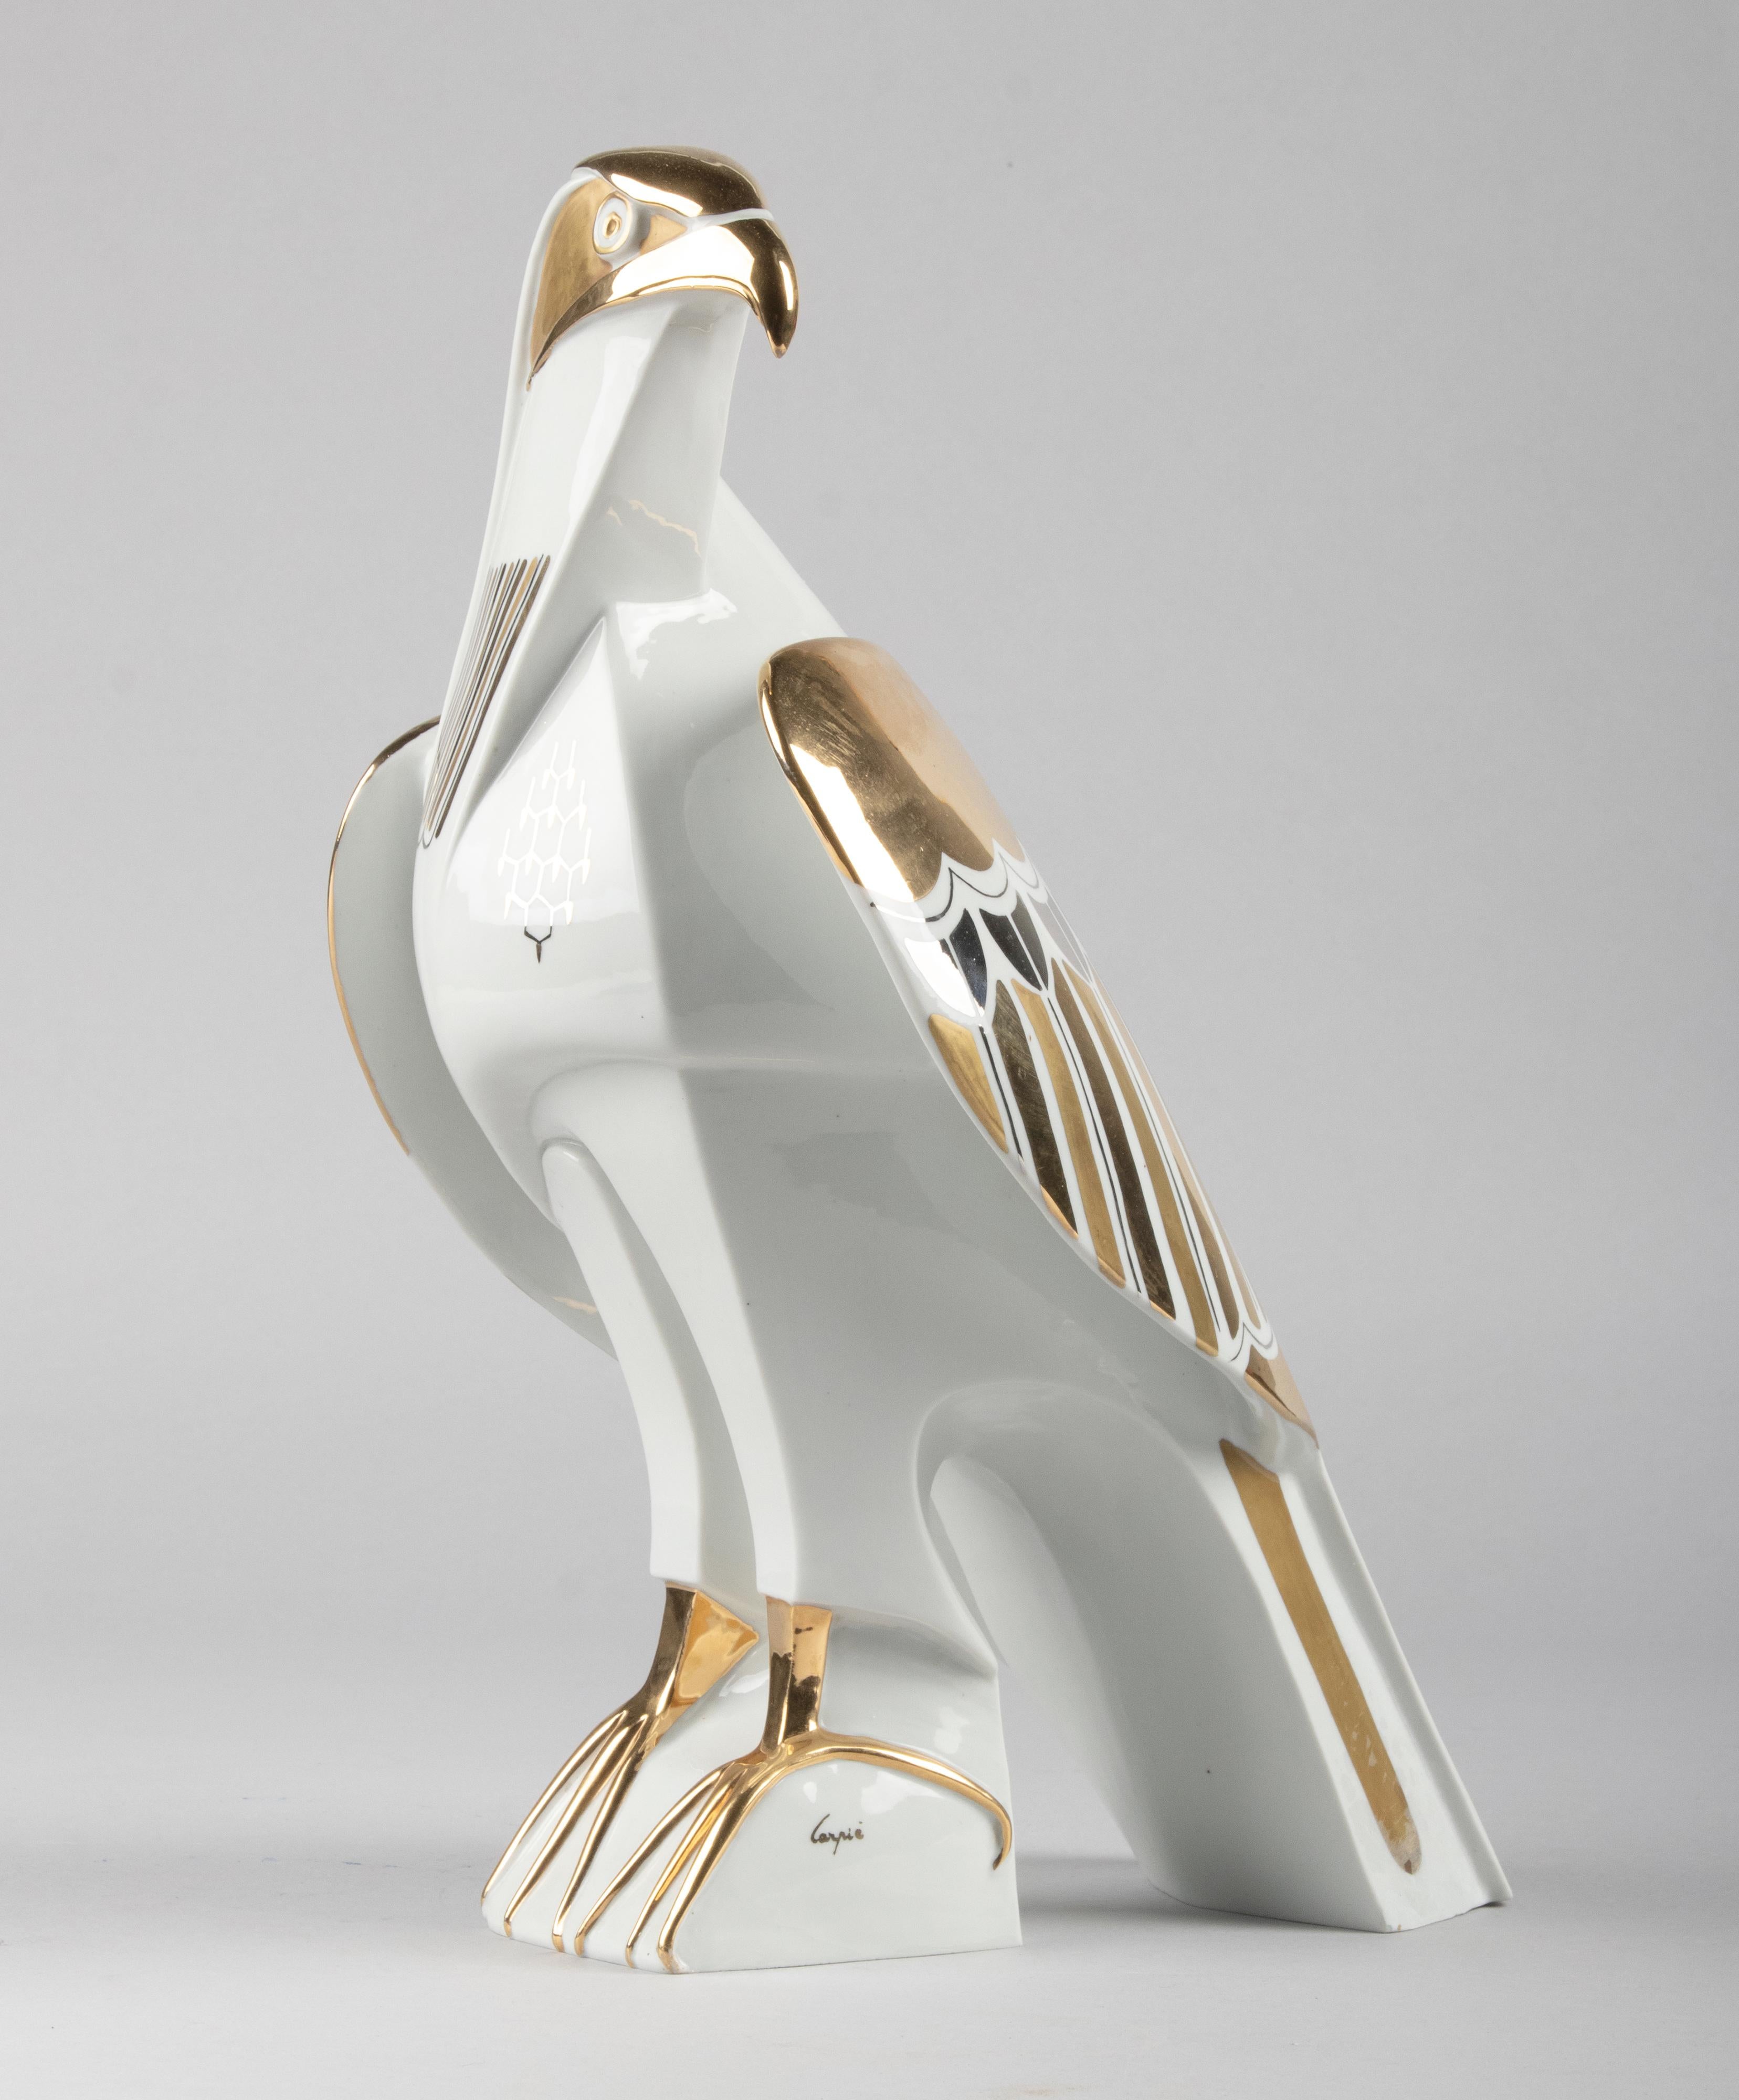 Large porcelain statue of an eagle. Beautiful white in color with striking gold accents. The statue has beautiful stylized shapes. The sculpture is signed 'Carpié', presumably of Italian manufacture.
 